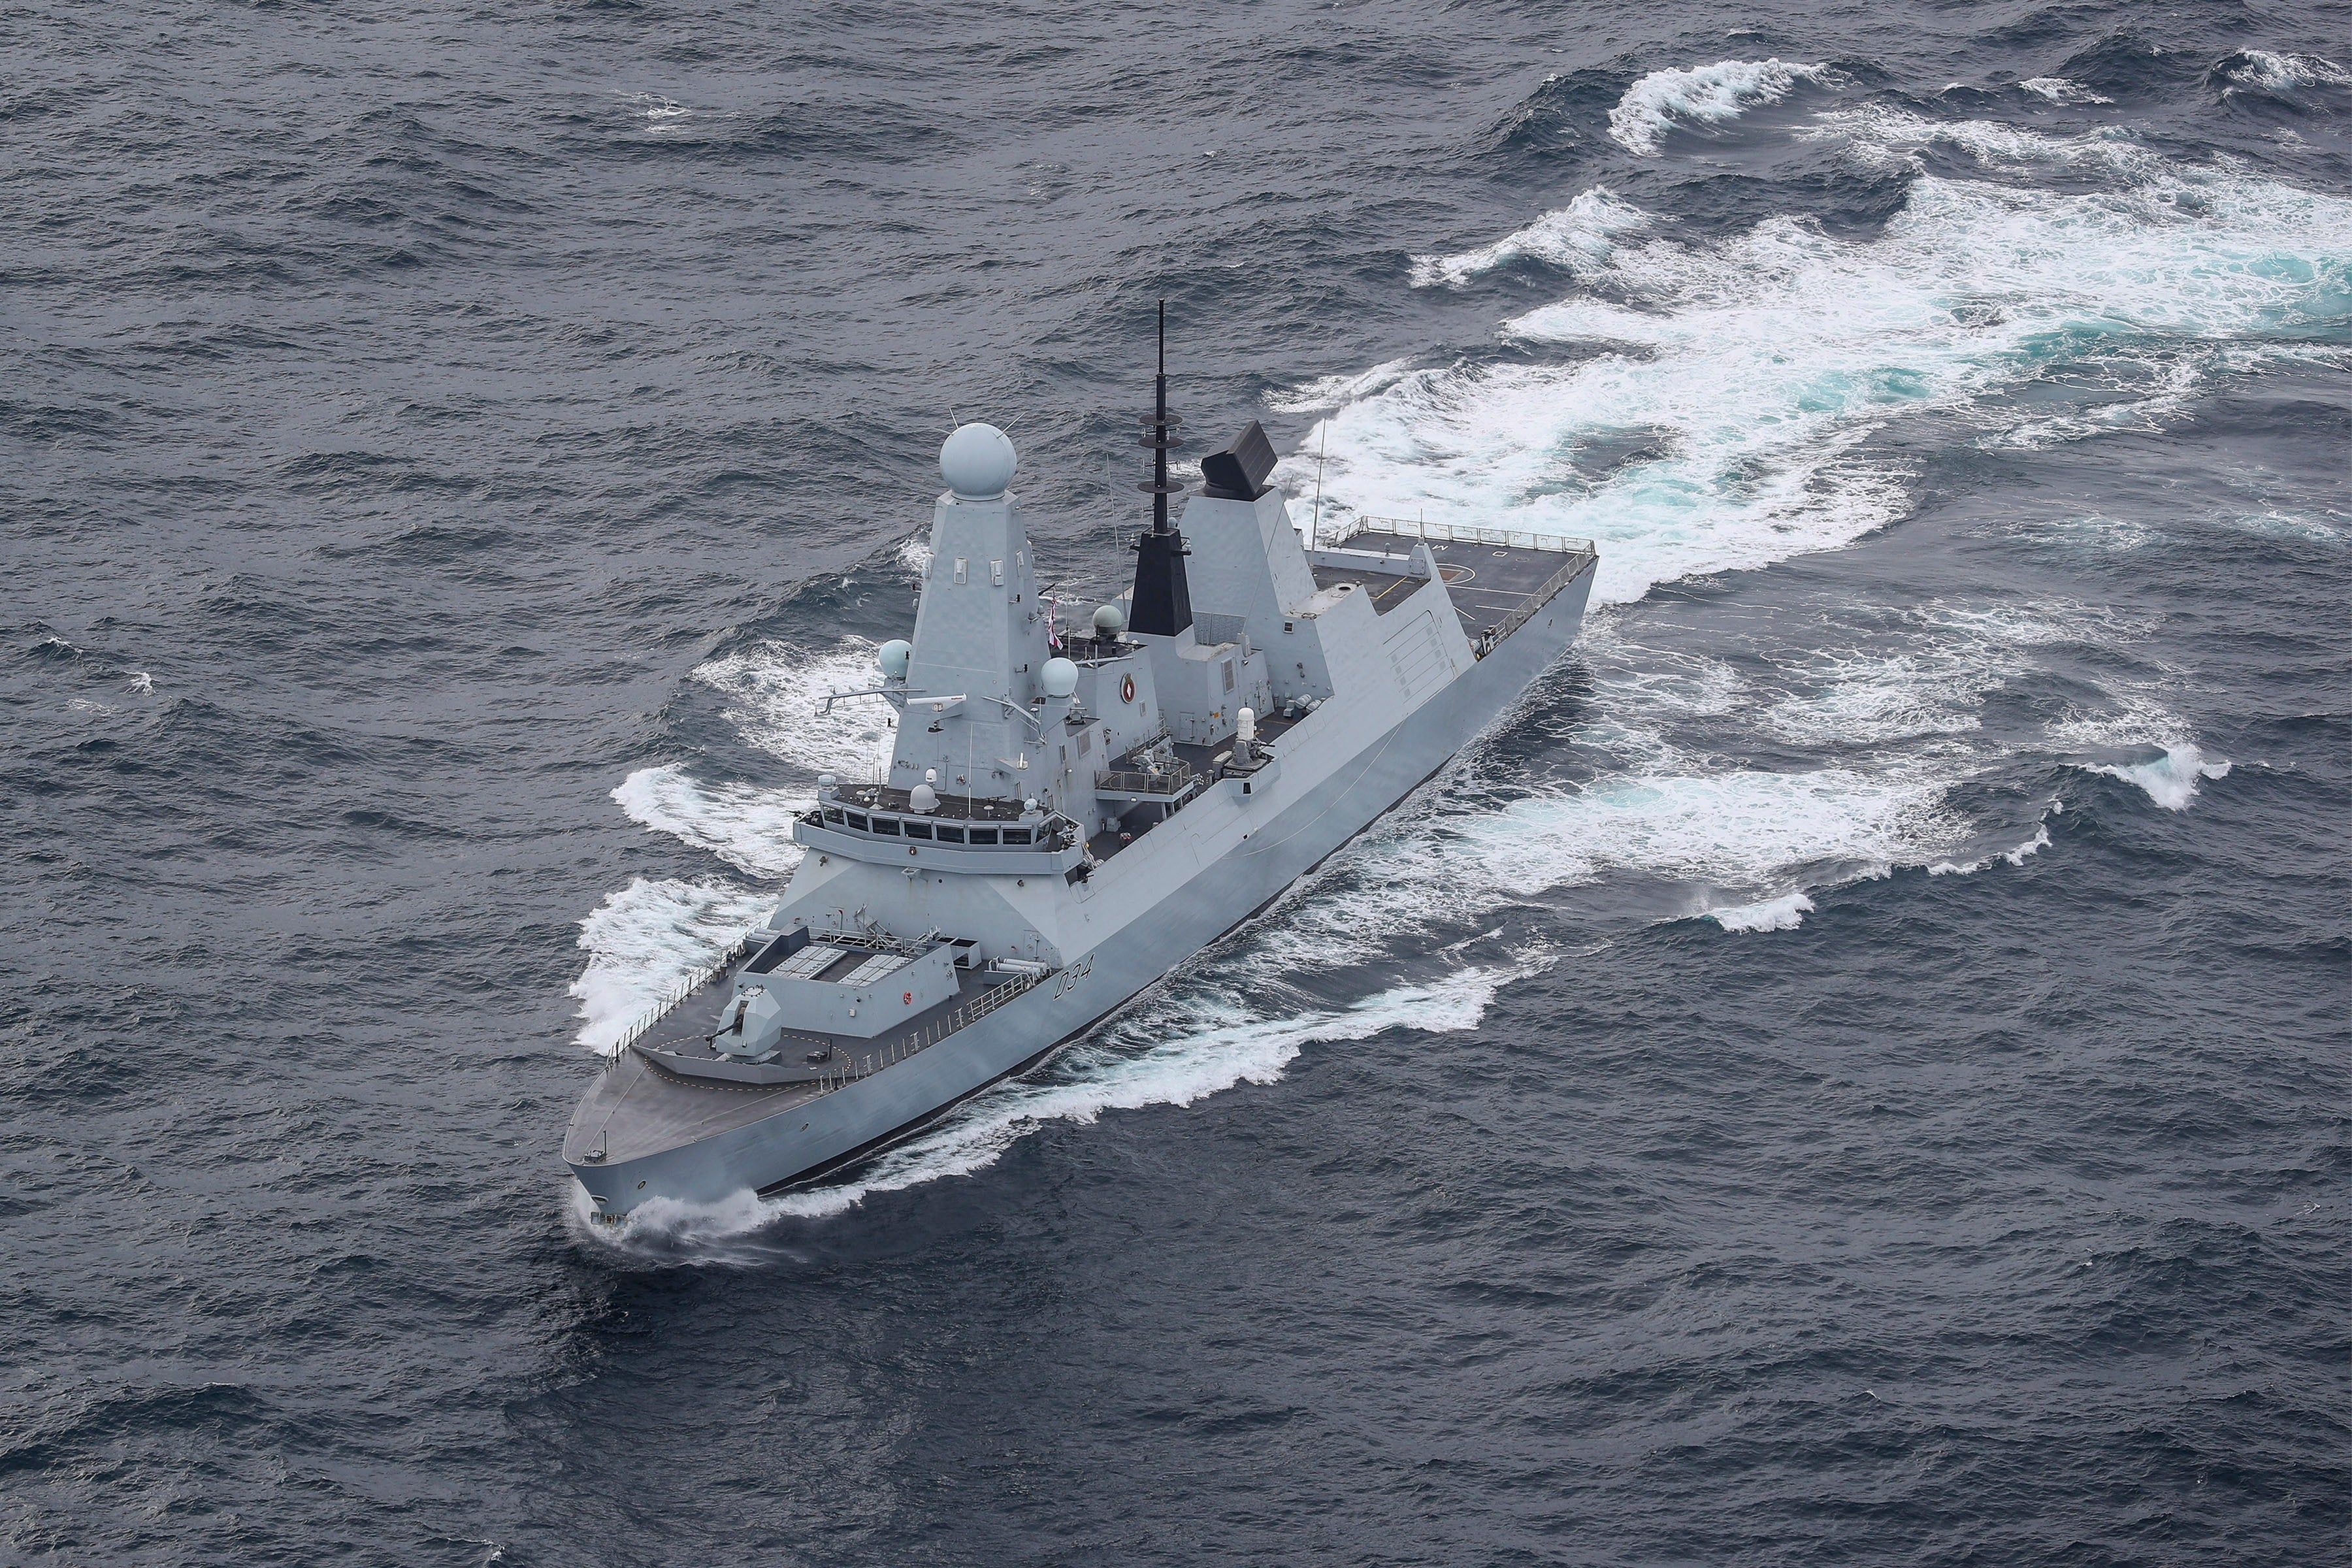 ‘HMS Diamond’ is on her way to the Red Sea as part of a coaliton to protect commercial shipping